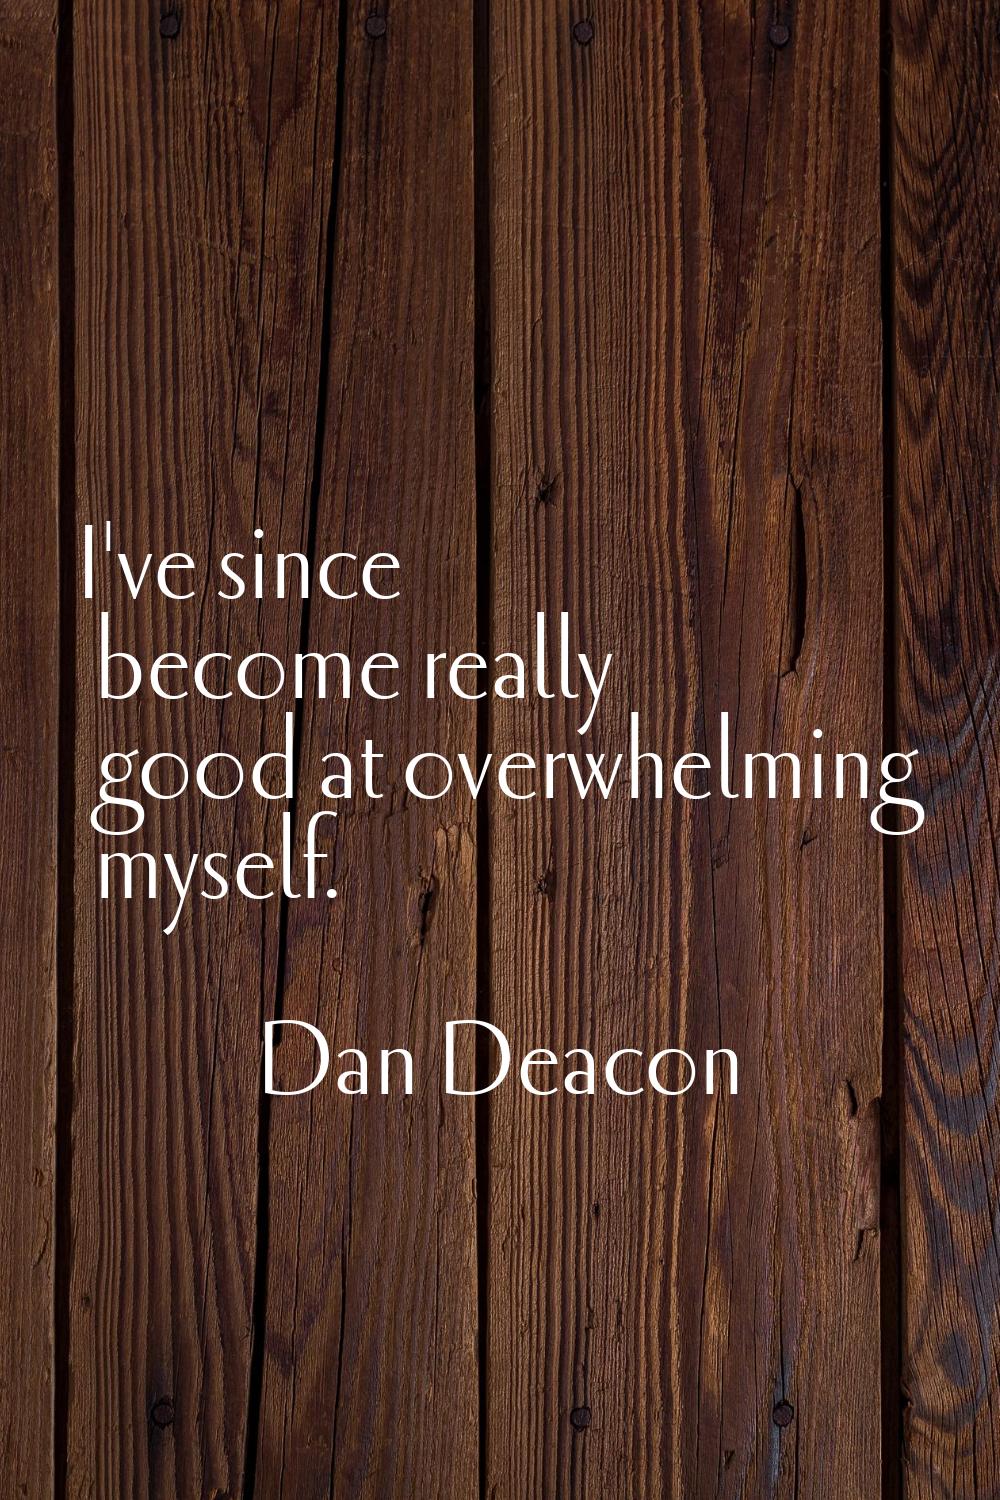 I've since become really good at overwhelming myself.